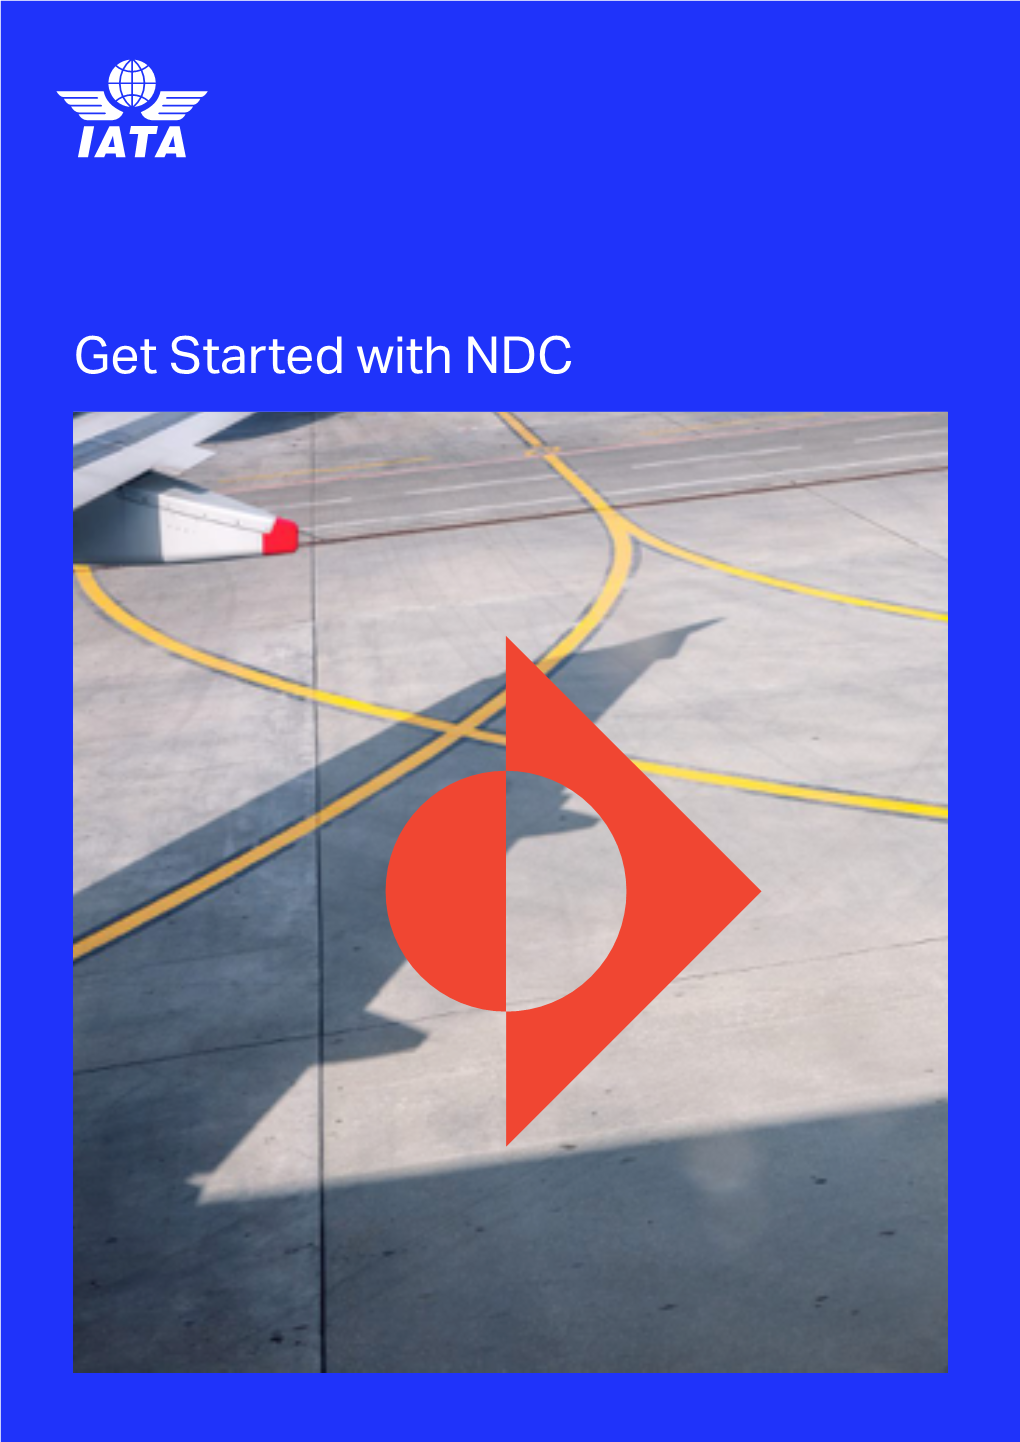 Get Started with NDC